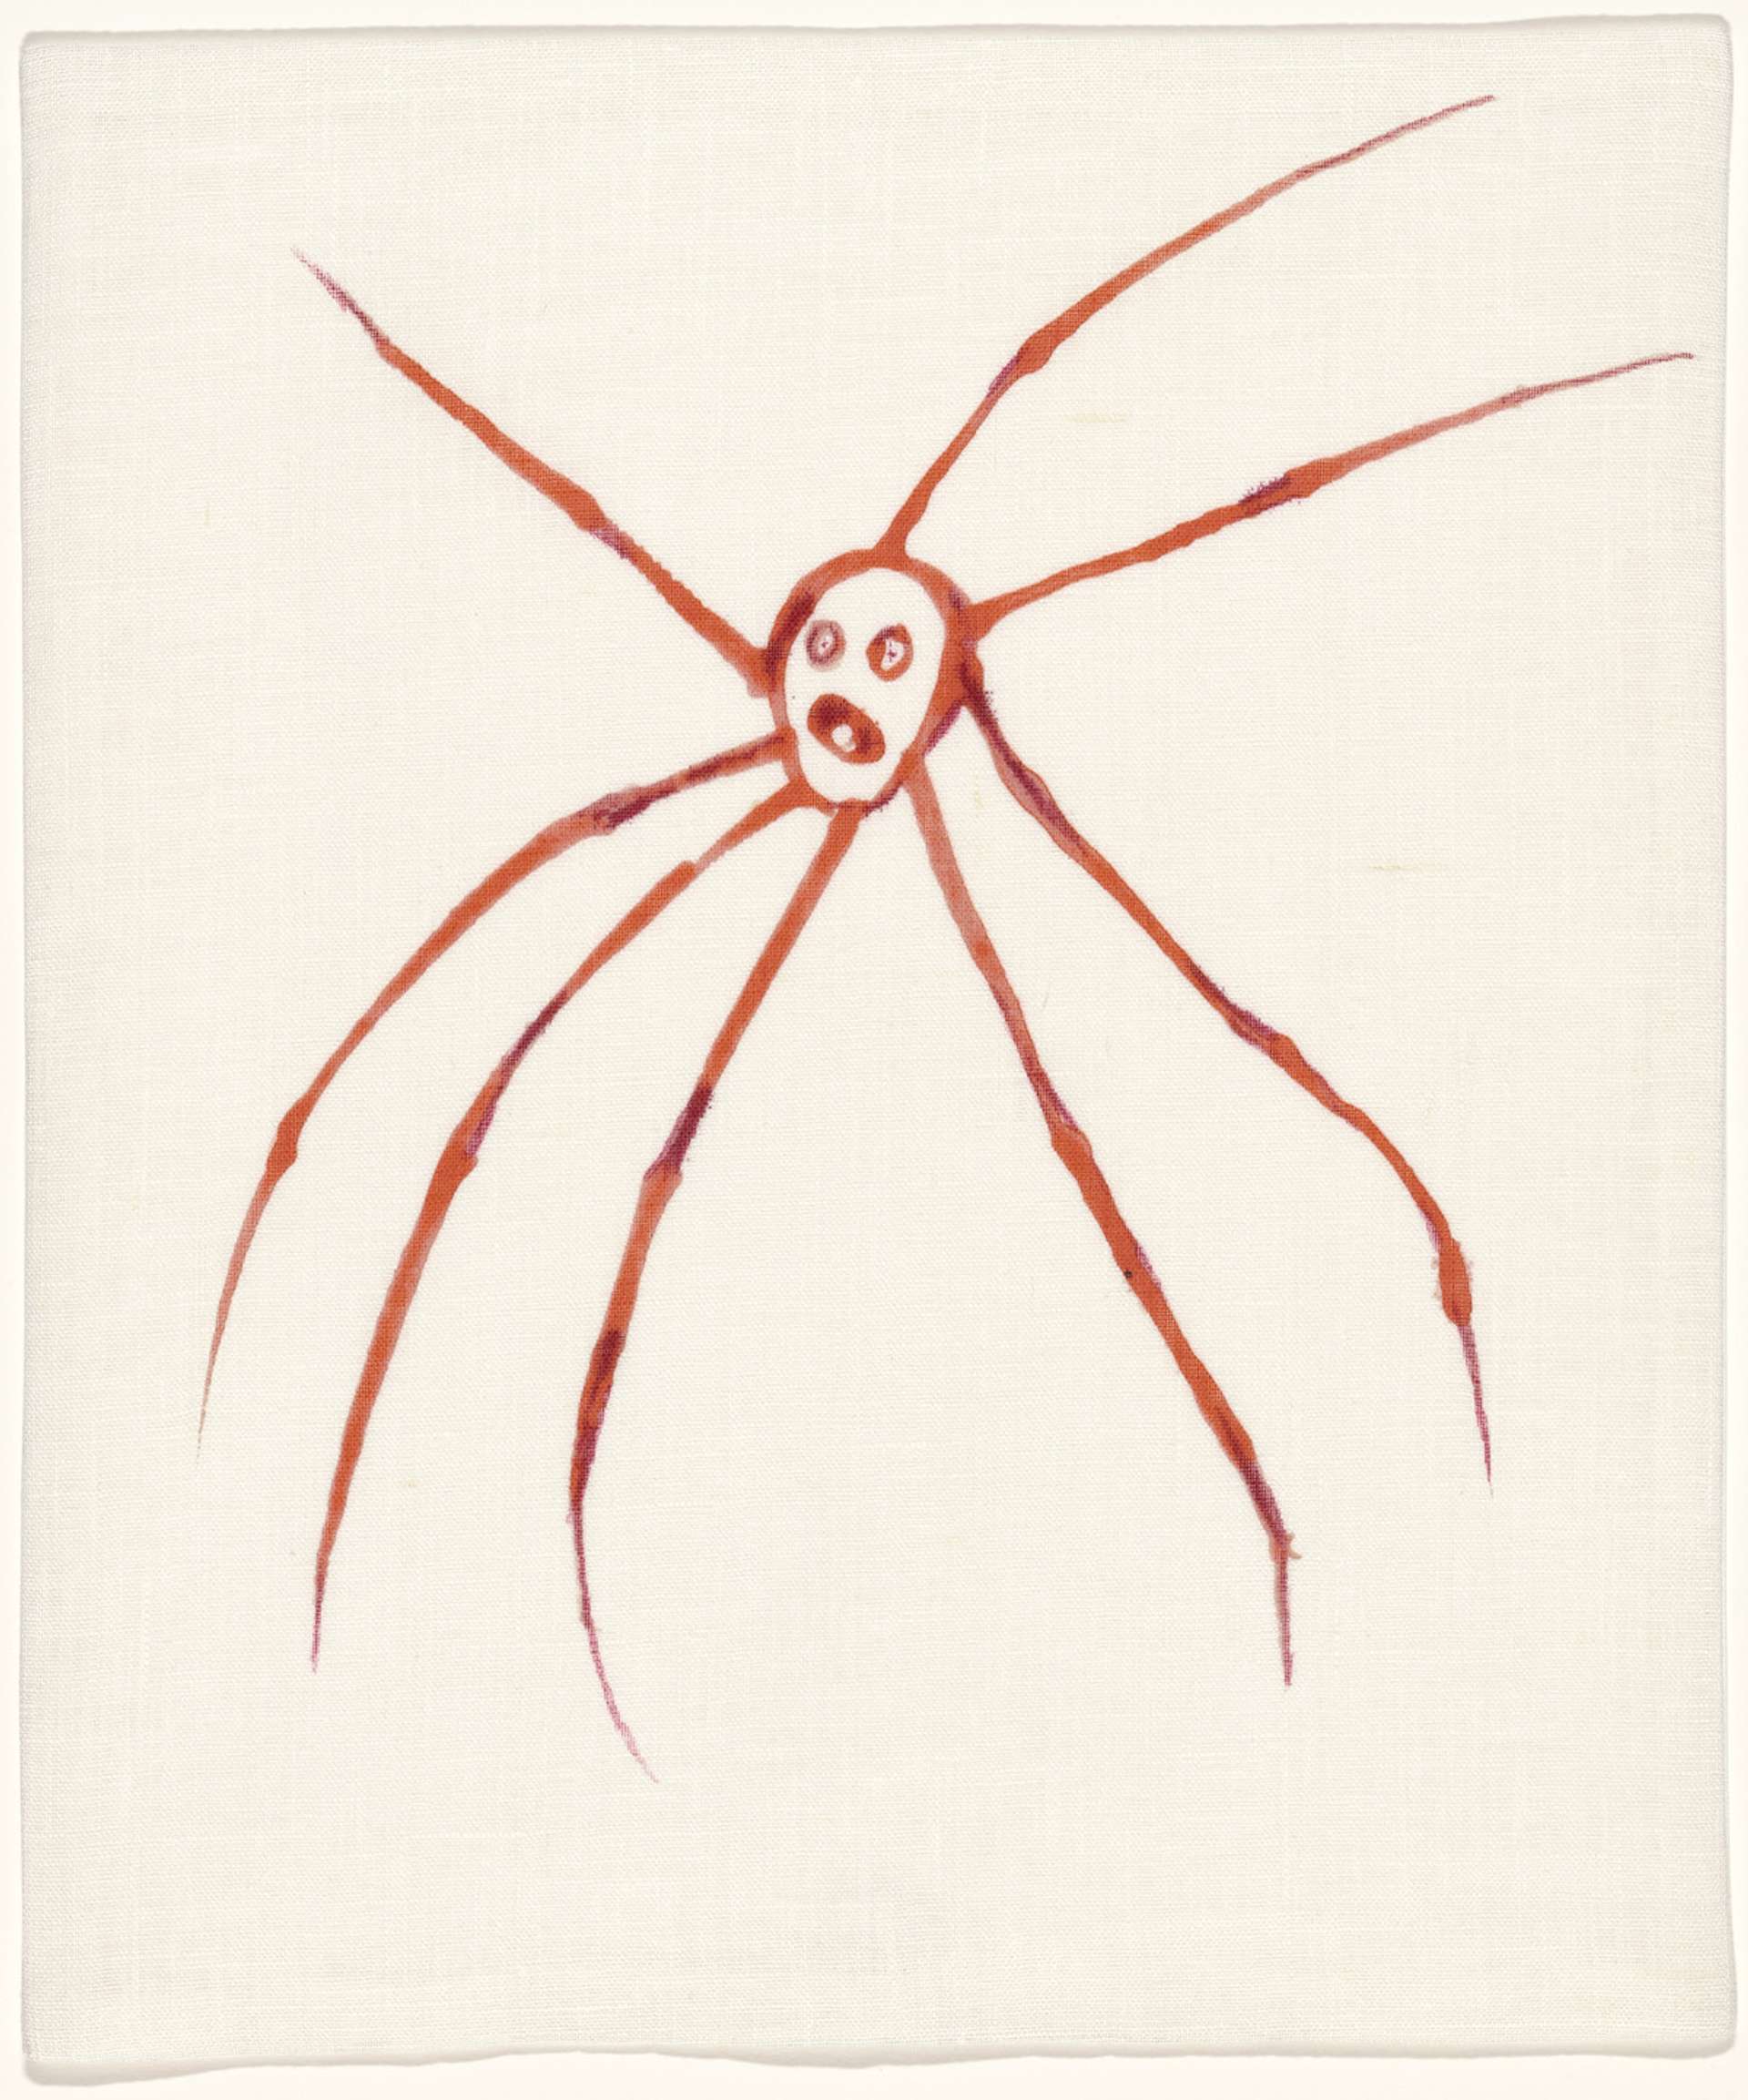 The Fragile 6 - Signed Print by Louise Bourgeois 2007 - MyArtBroker